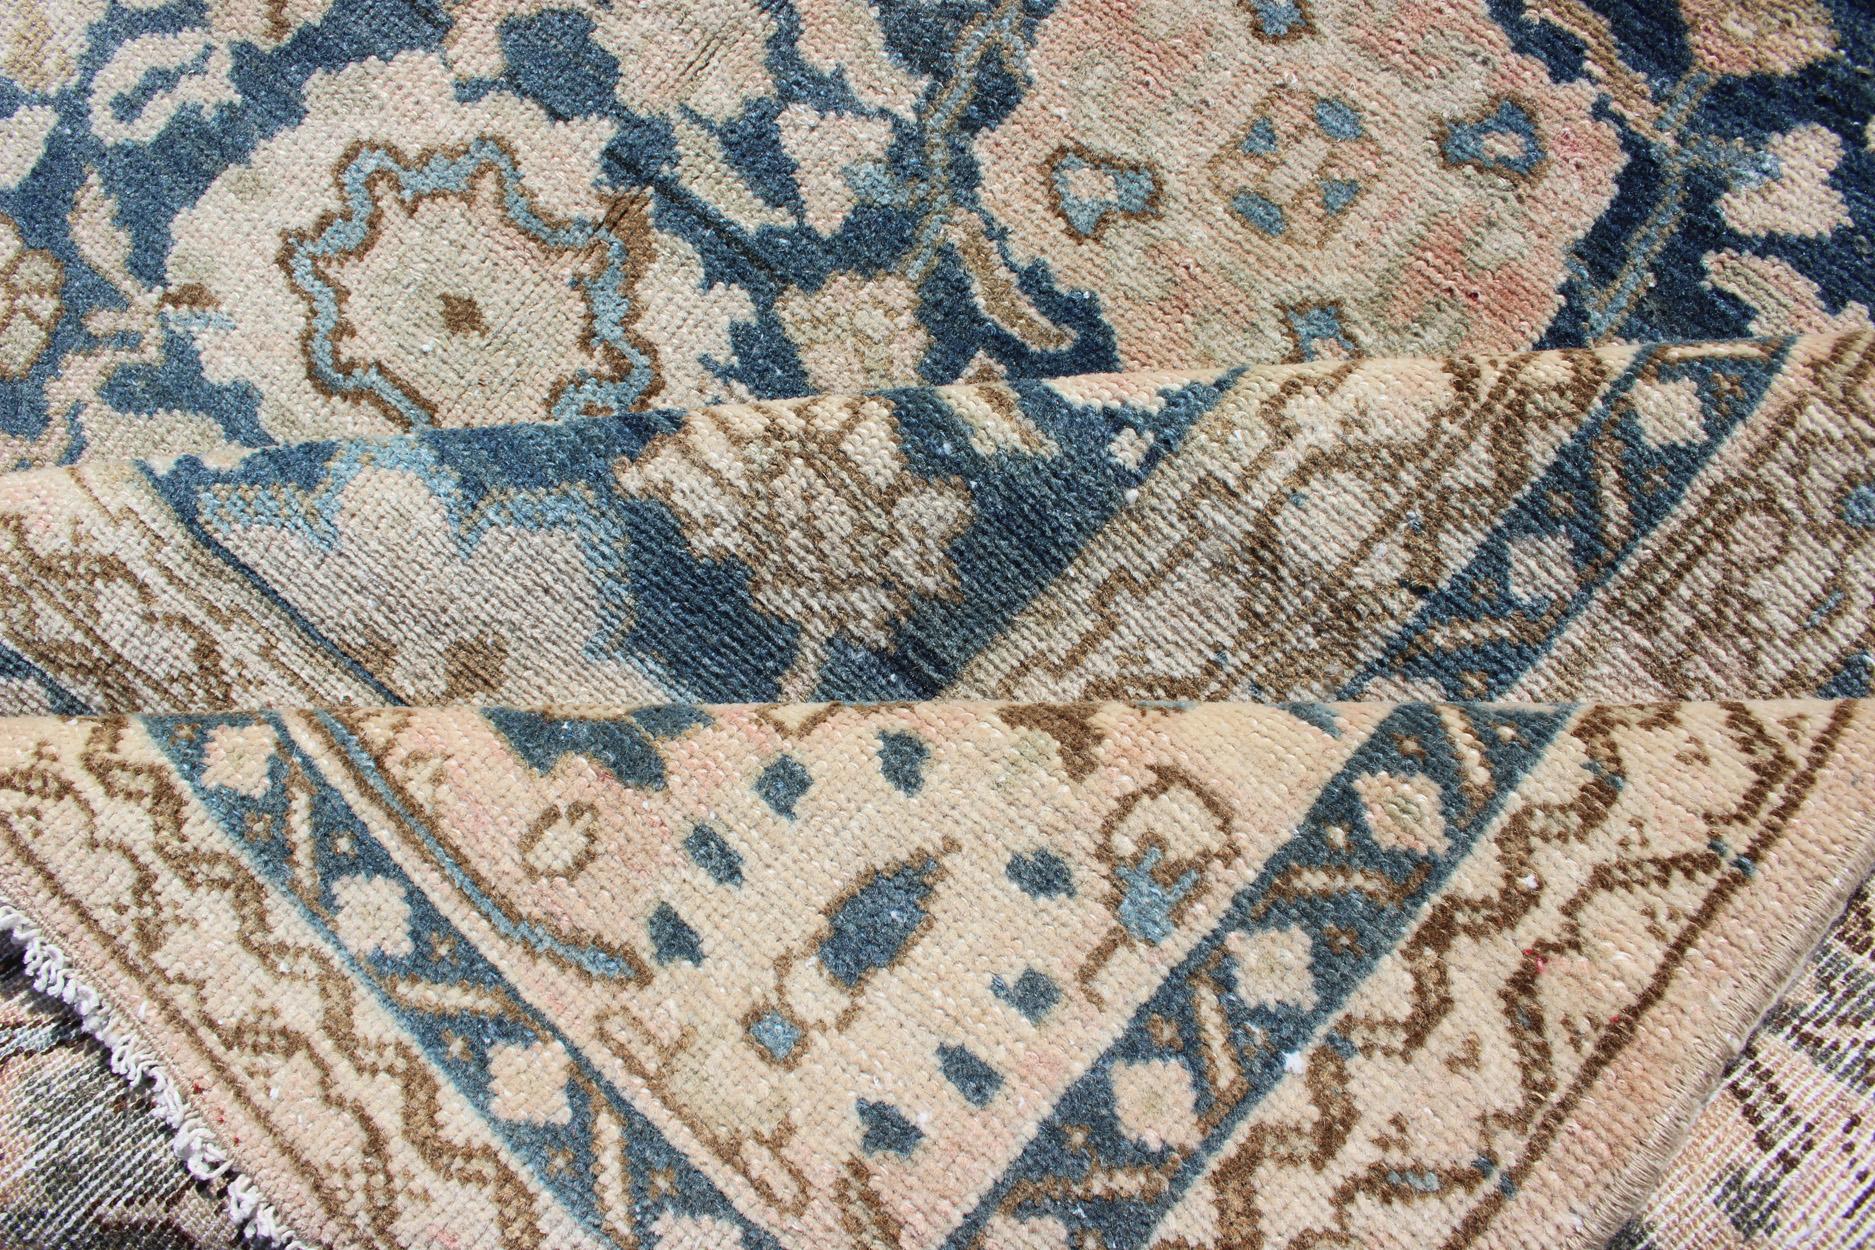 All-Over Blue Floral Persian Hamadan Rug in Navy Blue and Earthy Tones In Good Condition For Sale In Atlanta, GA